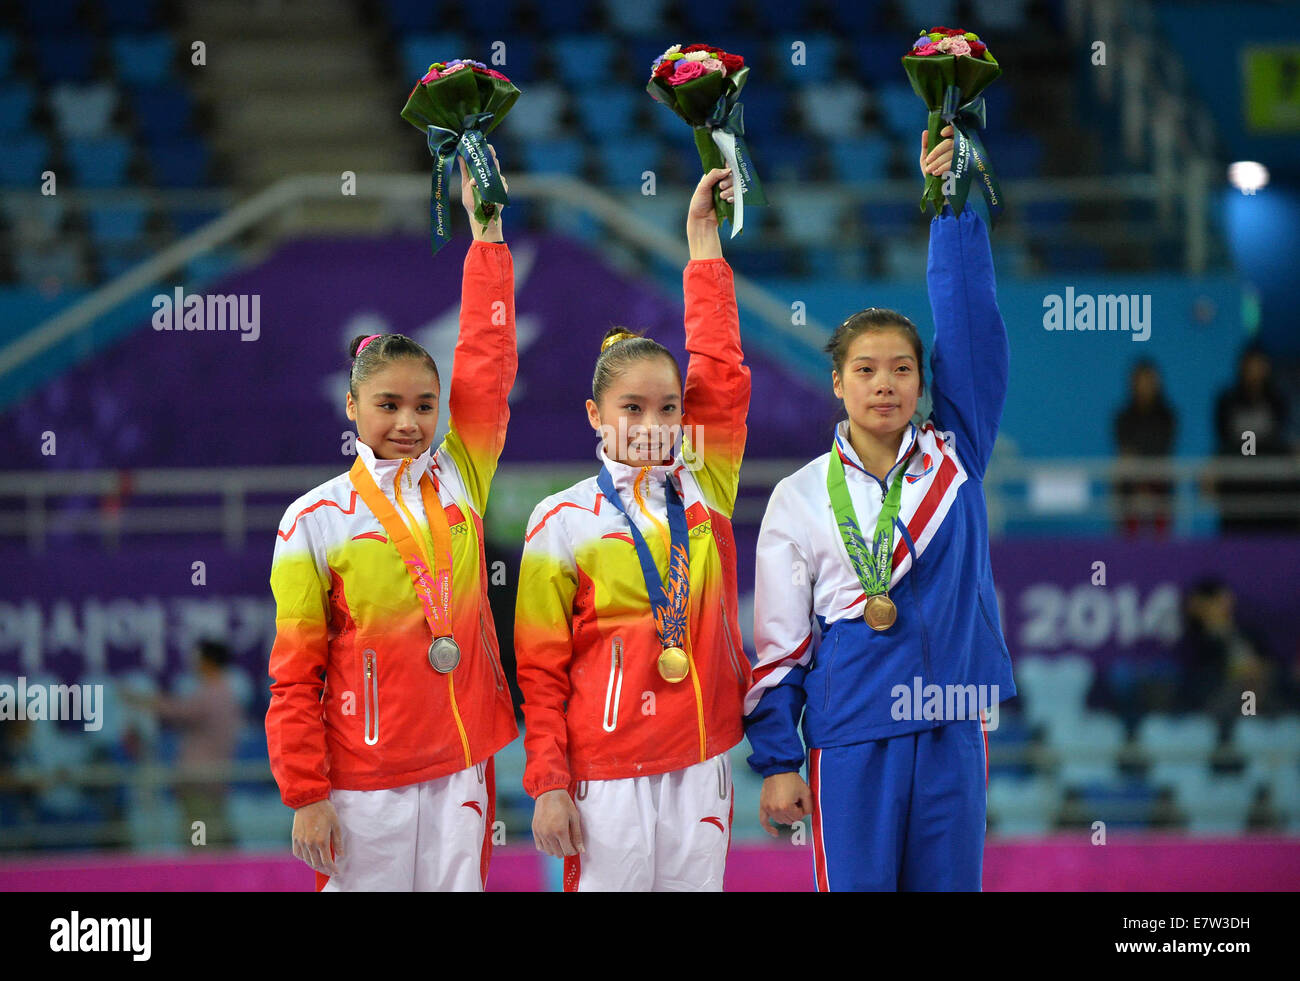 Incheon, South Korea. 24th Sep, 2014. Gold medalist Yao Jinnan (C) of China, silver medalist Huang Huidan (L) of China and bronze medalist Kang Yongmi of the Democratic People's Republic of Korea pose during the awarding ceremony the women's uneven bars contest of gymnastics artistic event at the 17th Asian Games in Incheon, South Korea, Sept. 24, 2014. Yao Jinnan claimed the title with 15.466 points. Credit:  Zhu Zheng/Xinhua/Alamy Live News Stock Photo